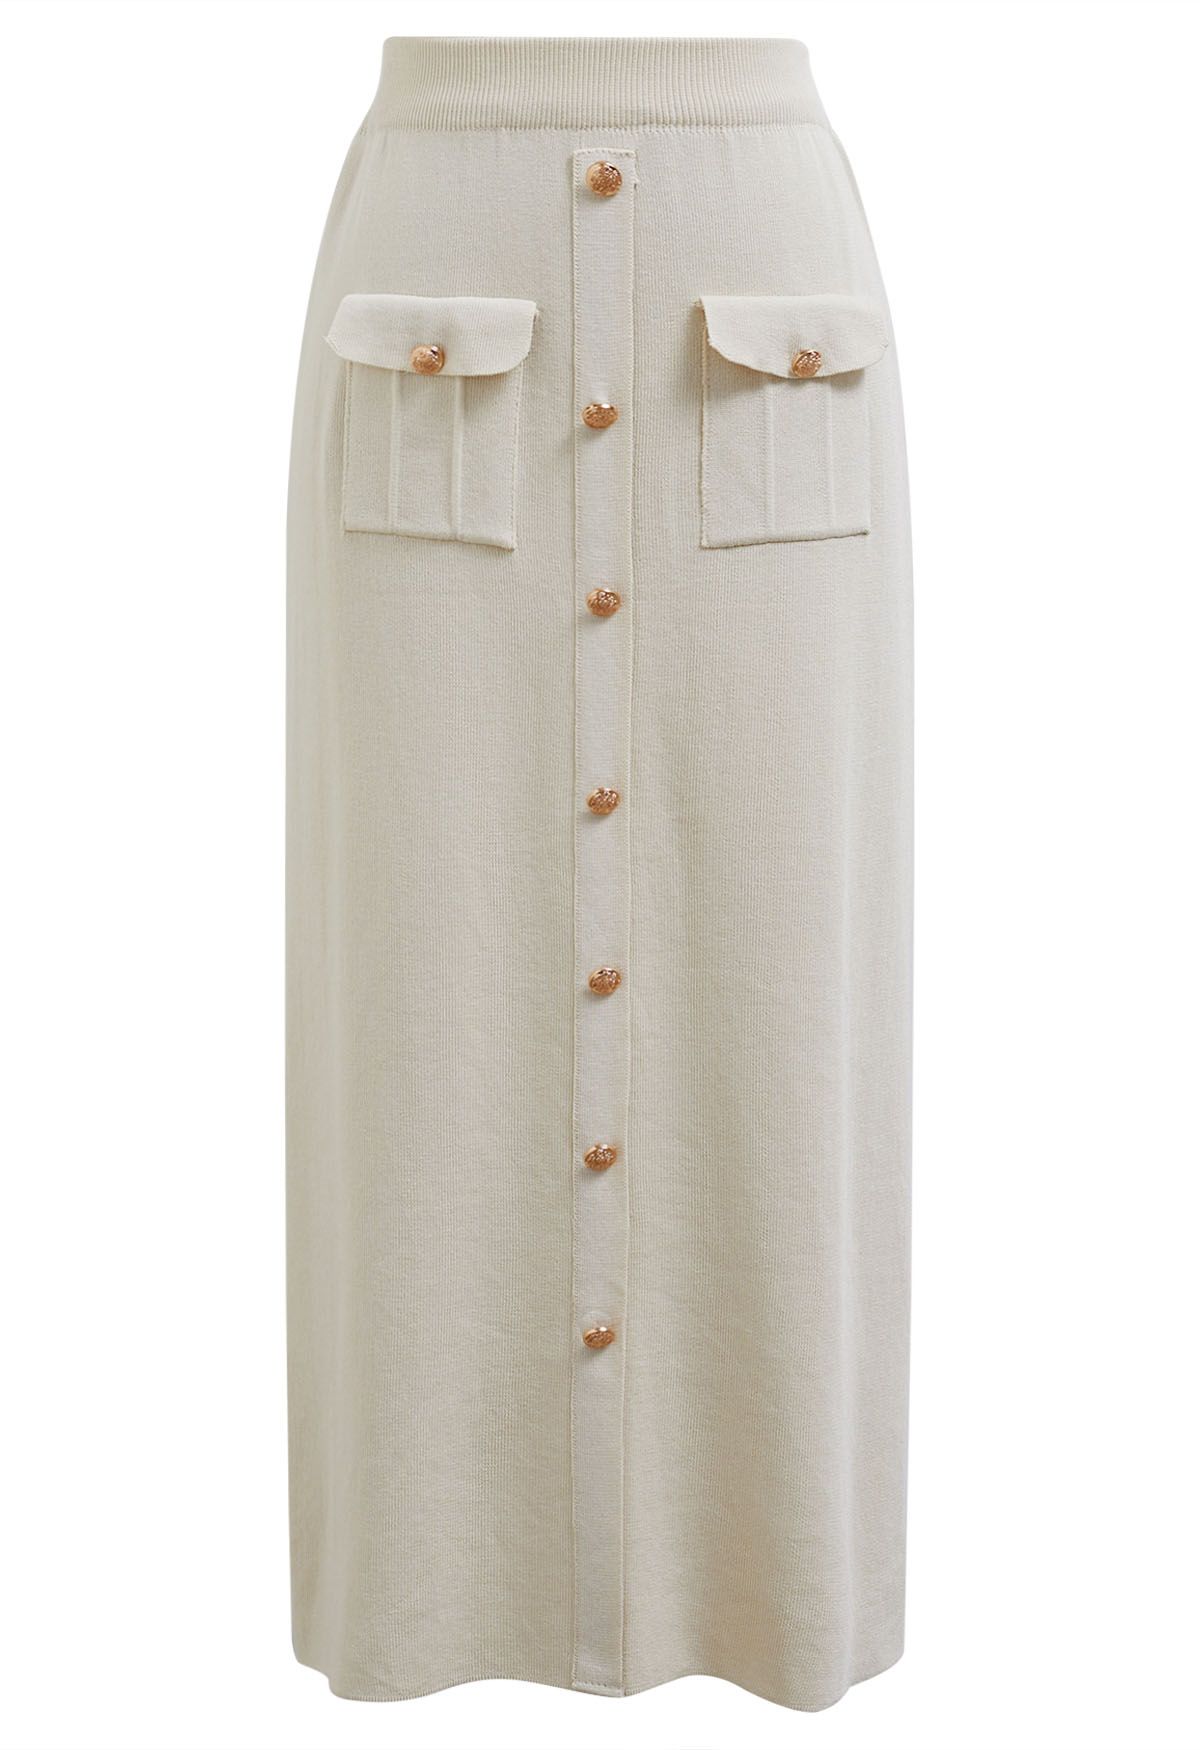 Standout Button Embellished Knit Top and Midi Skirt Set in Ivory ...